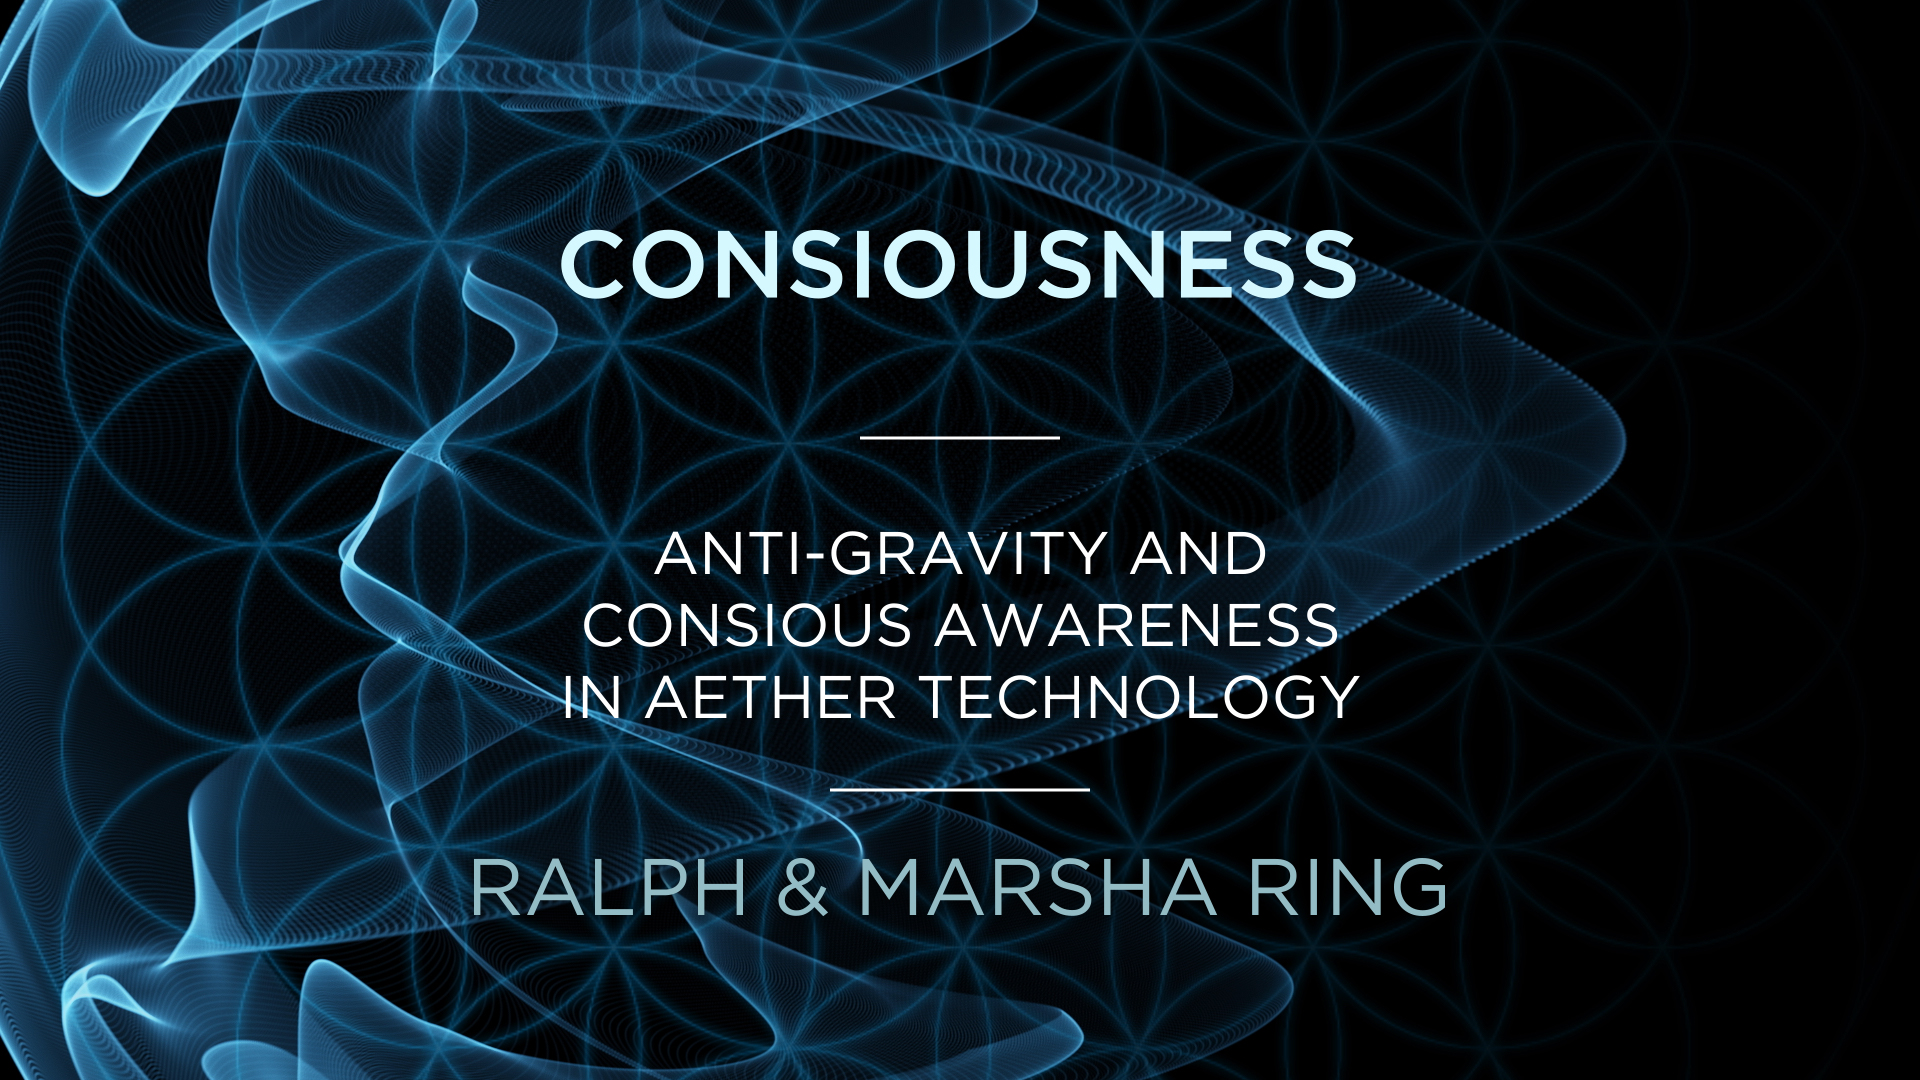 Ralph and Marsha Ring – Anti-gravity and consciousness in Aether Technology